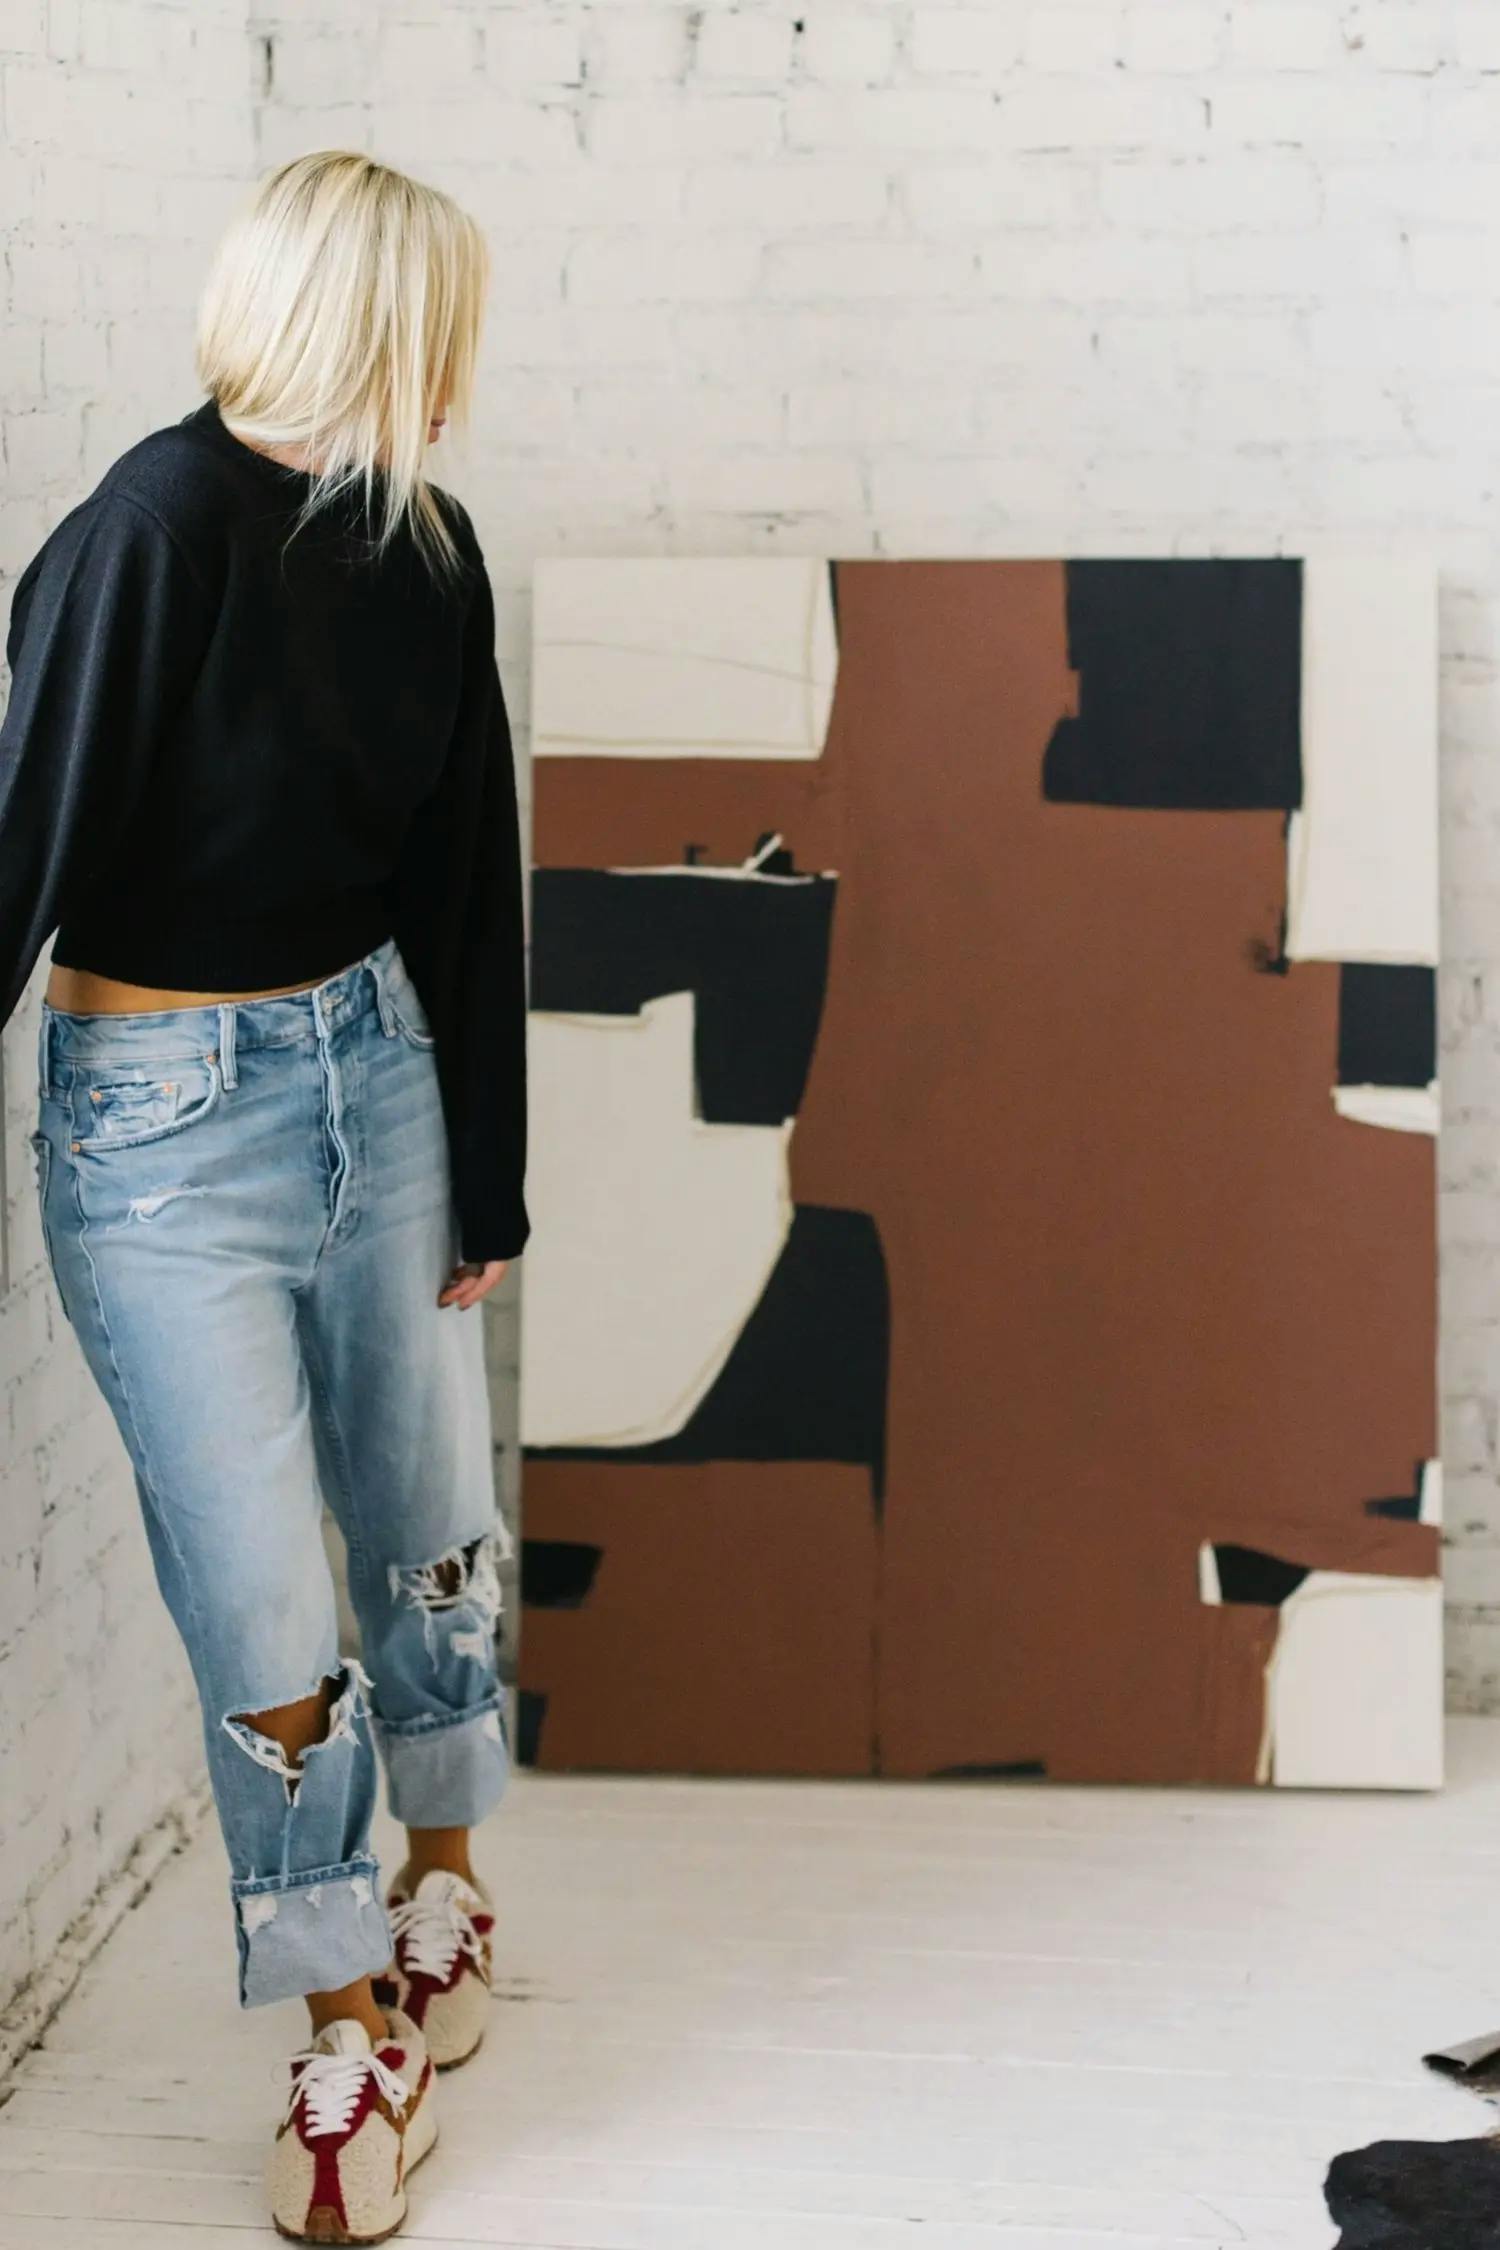 Artist Holly Addi standing next to a patchwork, terracotta and black painting in her studio.